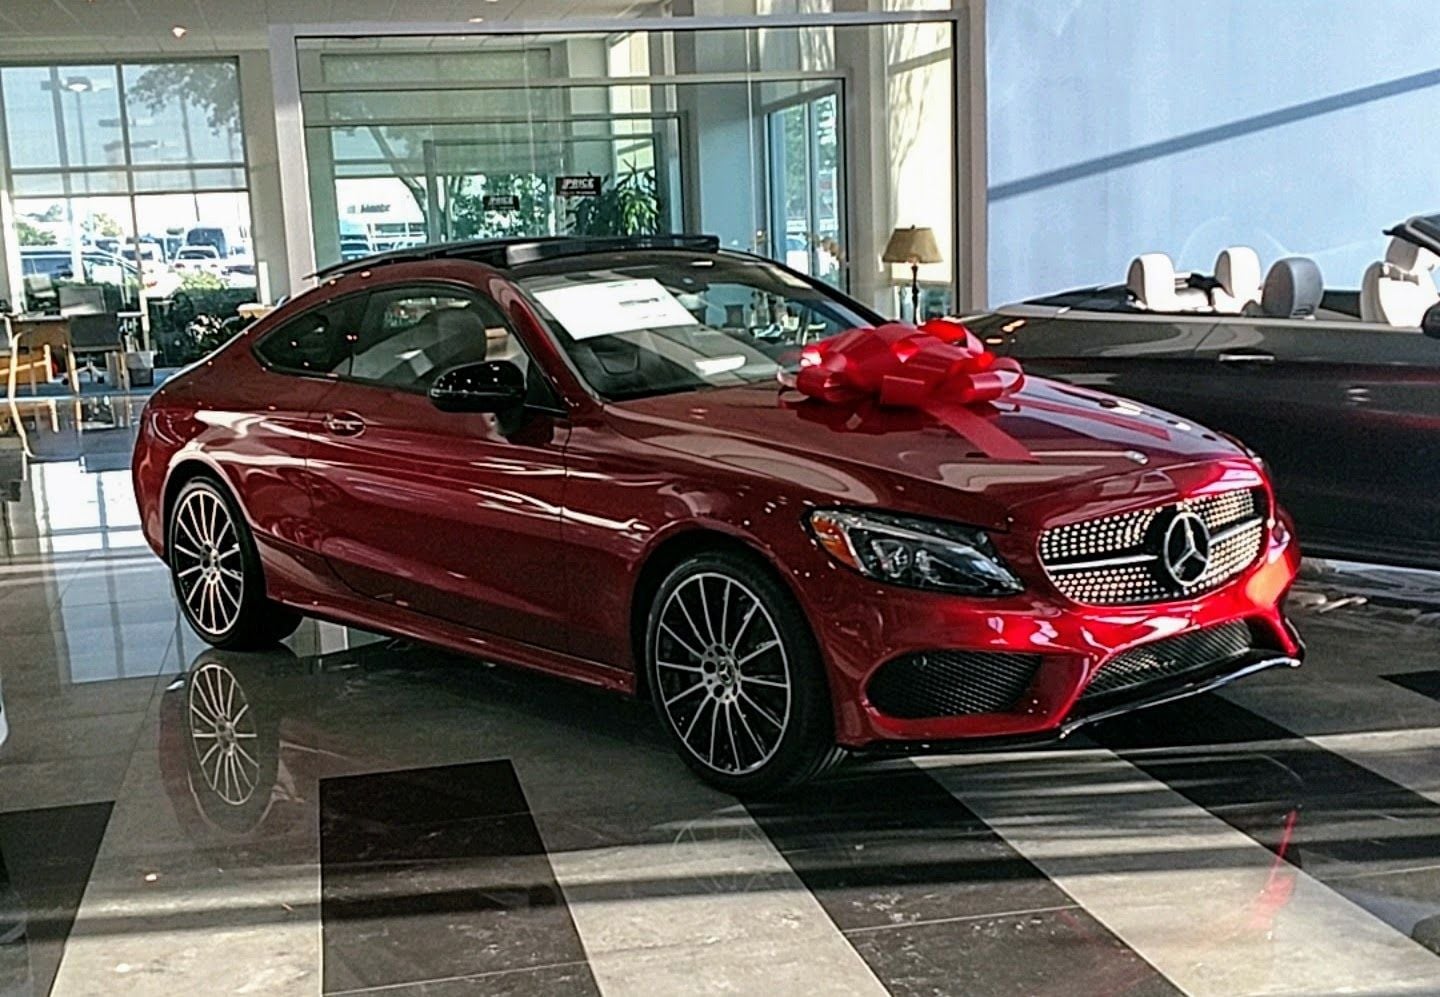 2017 Mercedes-Benz C300 - Stunning 2017 C300 Coupe - short-term lease transfer - Used - VIN WDDWJ4JBXHF520574 - 41,500 Miles - 4 cyl - 2WD - Automatic - Coupe - Red - Cypress, TX 77429, United States